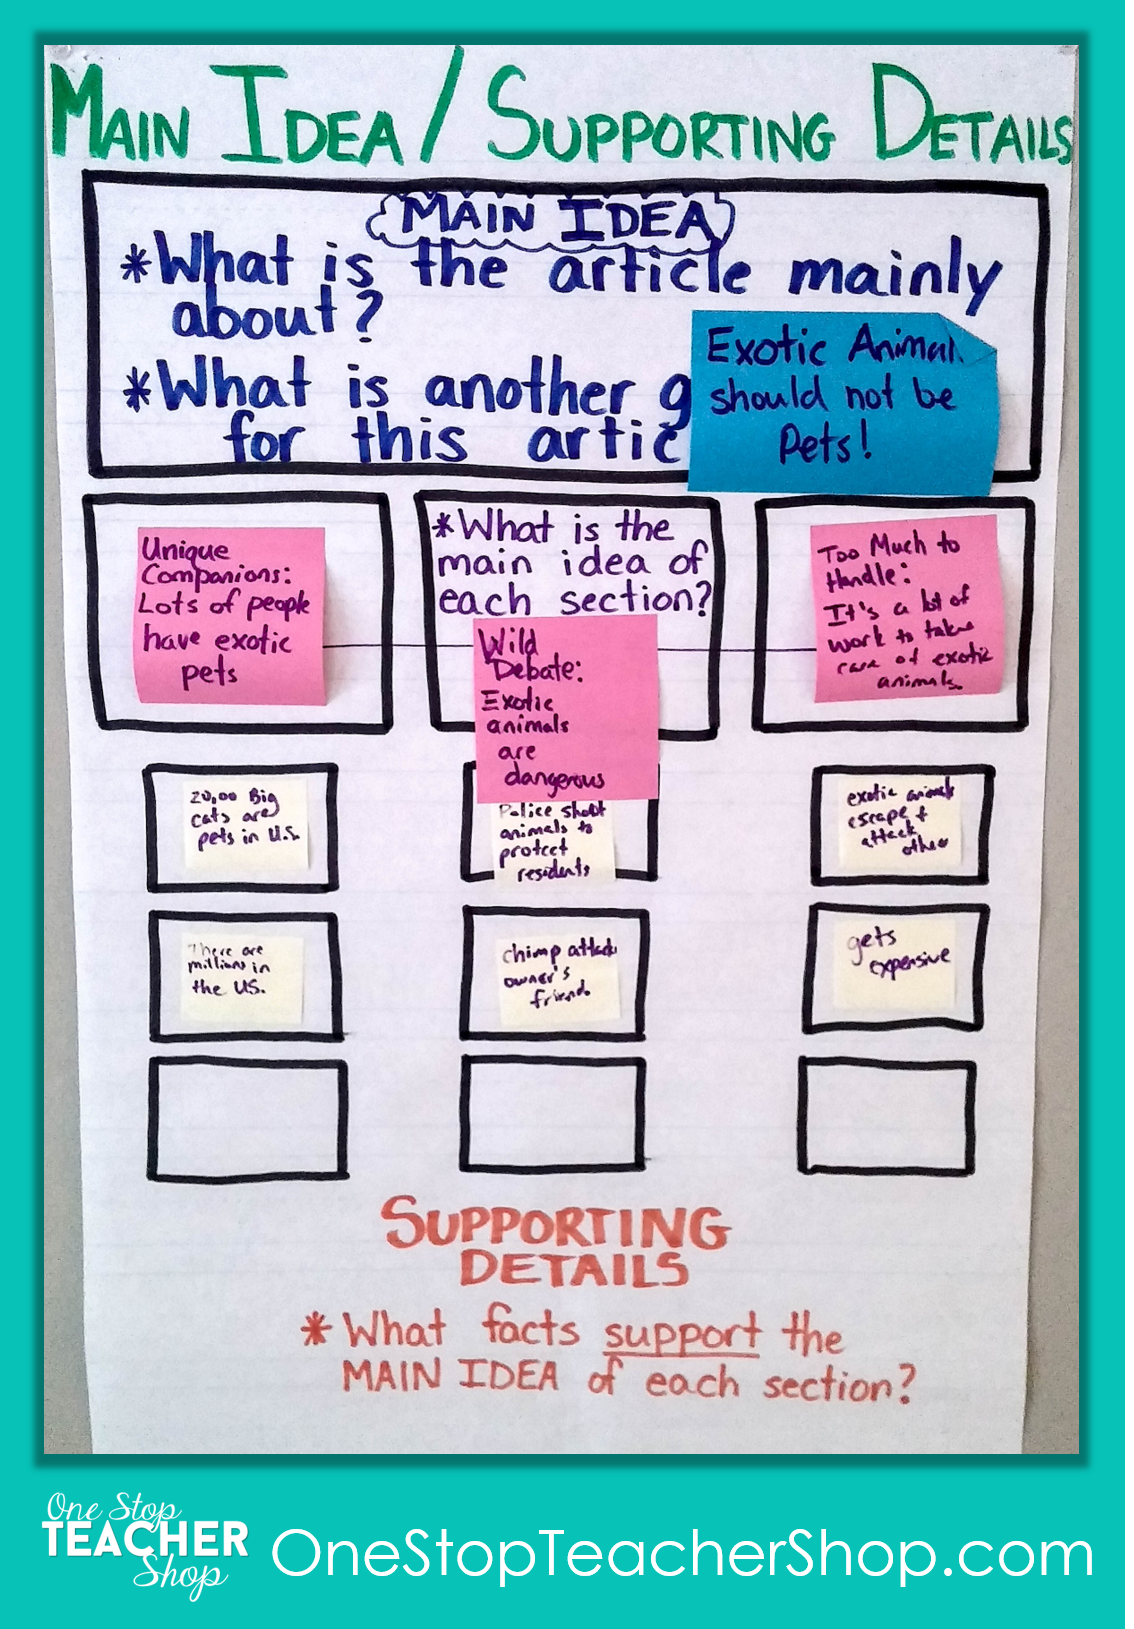 Anchor Chart For Main Idea And Details